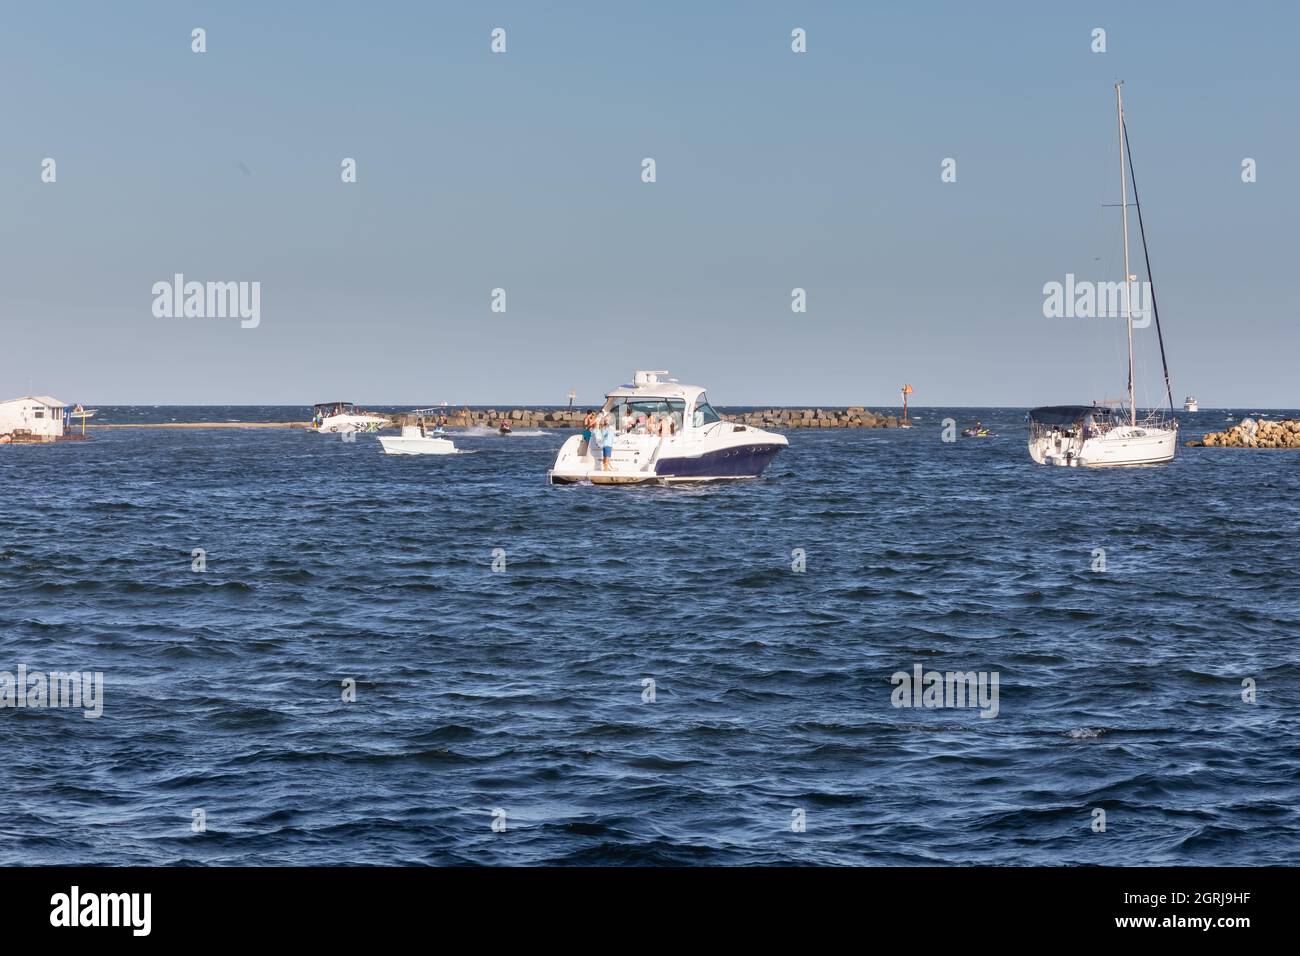 POMPANO BEACH FLORIDA, UNITED STATES - May 29, 2021: Different yachts and boats in a small bay by the Atlantic Ocean at the Pompano Beach, Florida Stock Photo